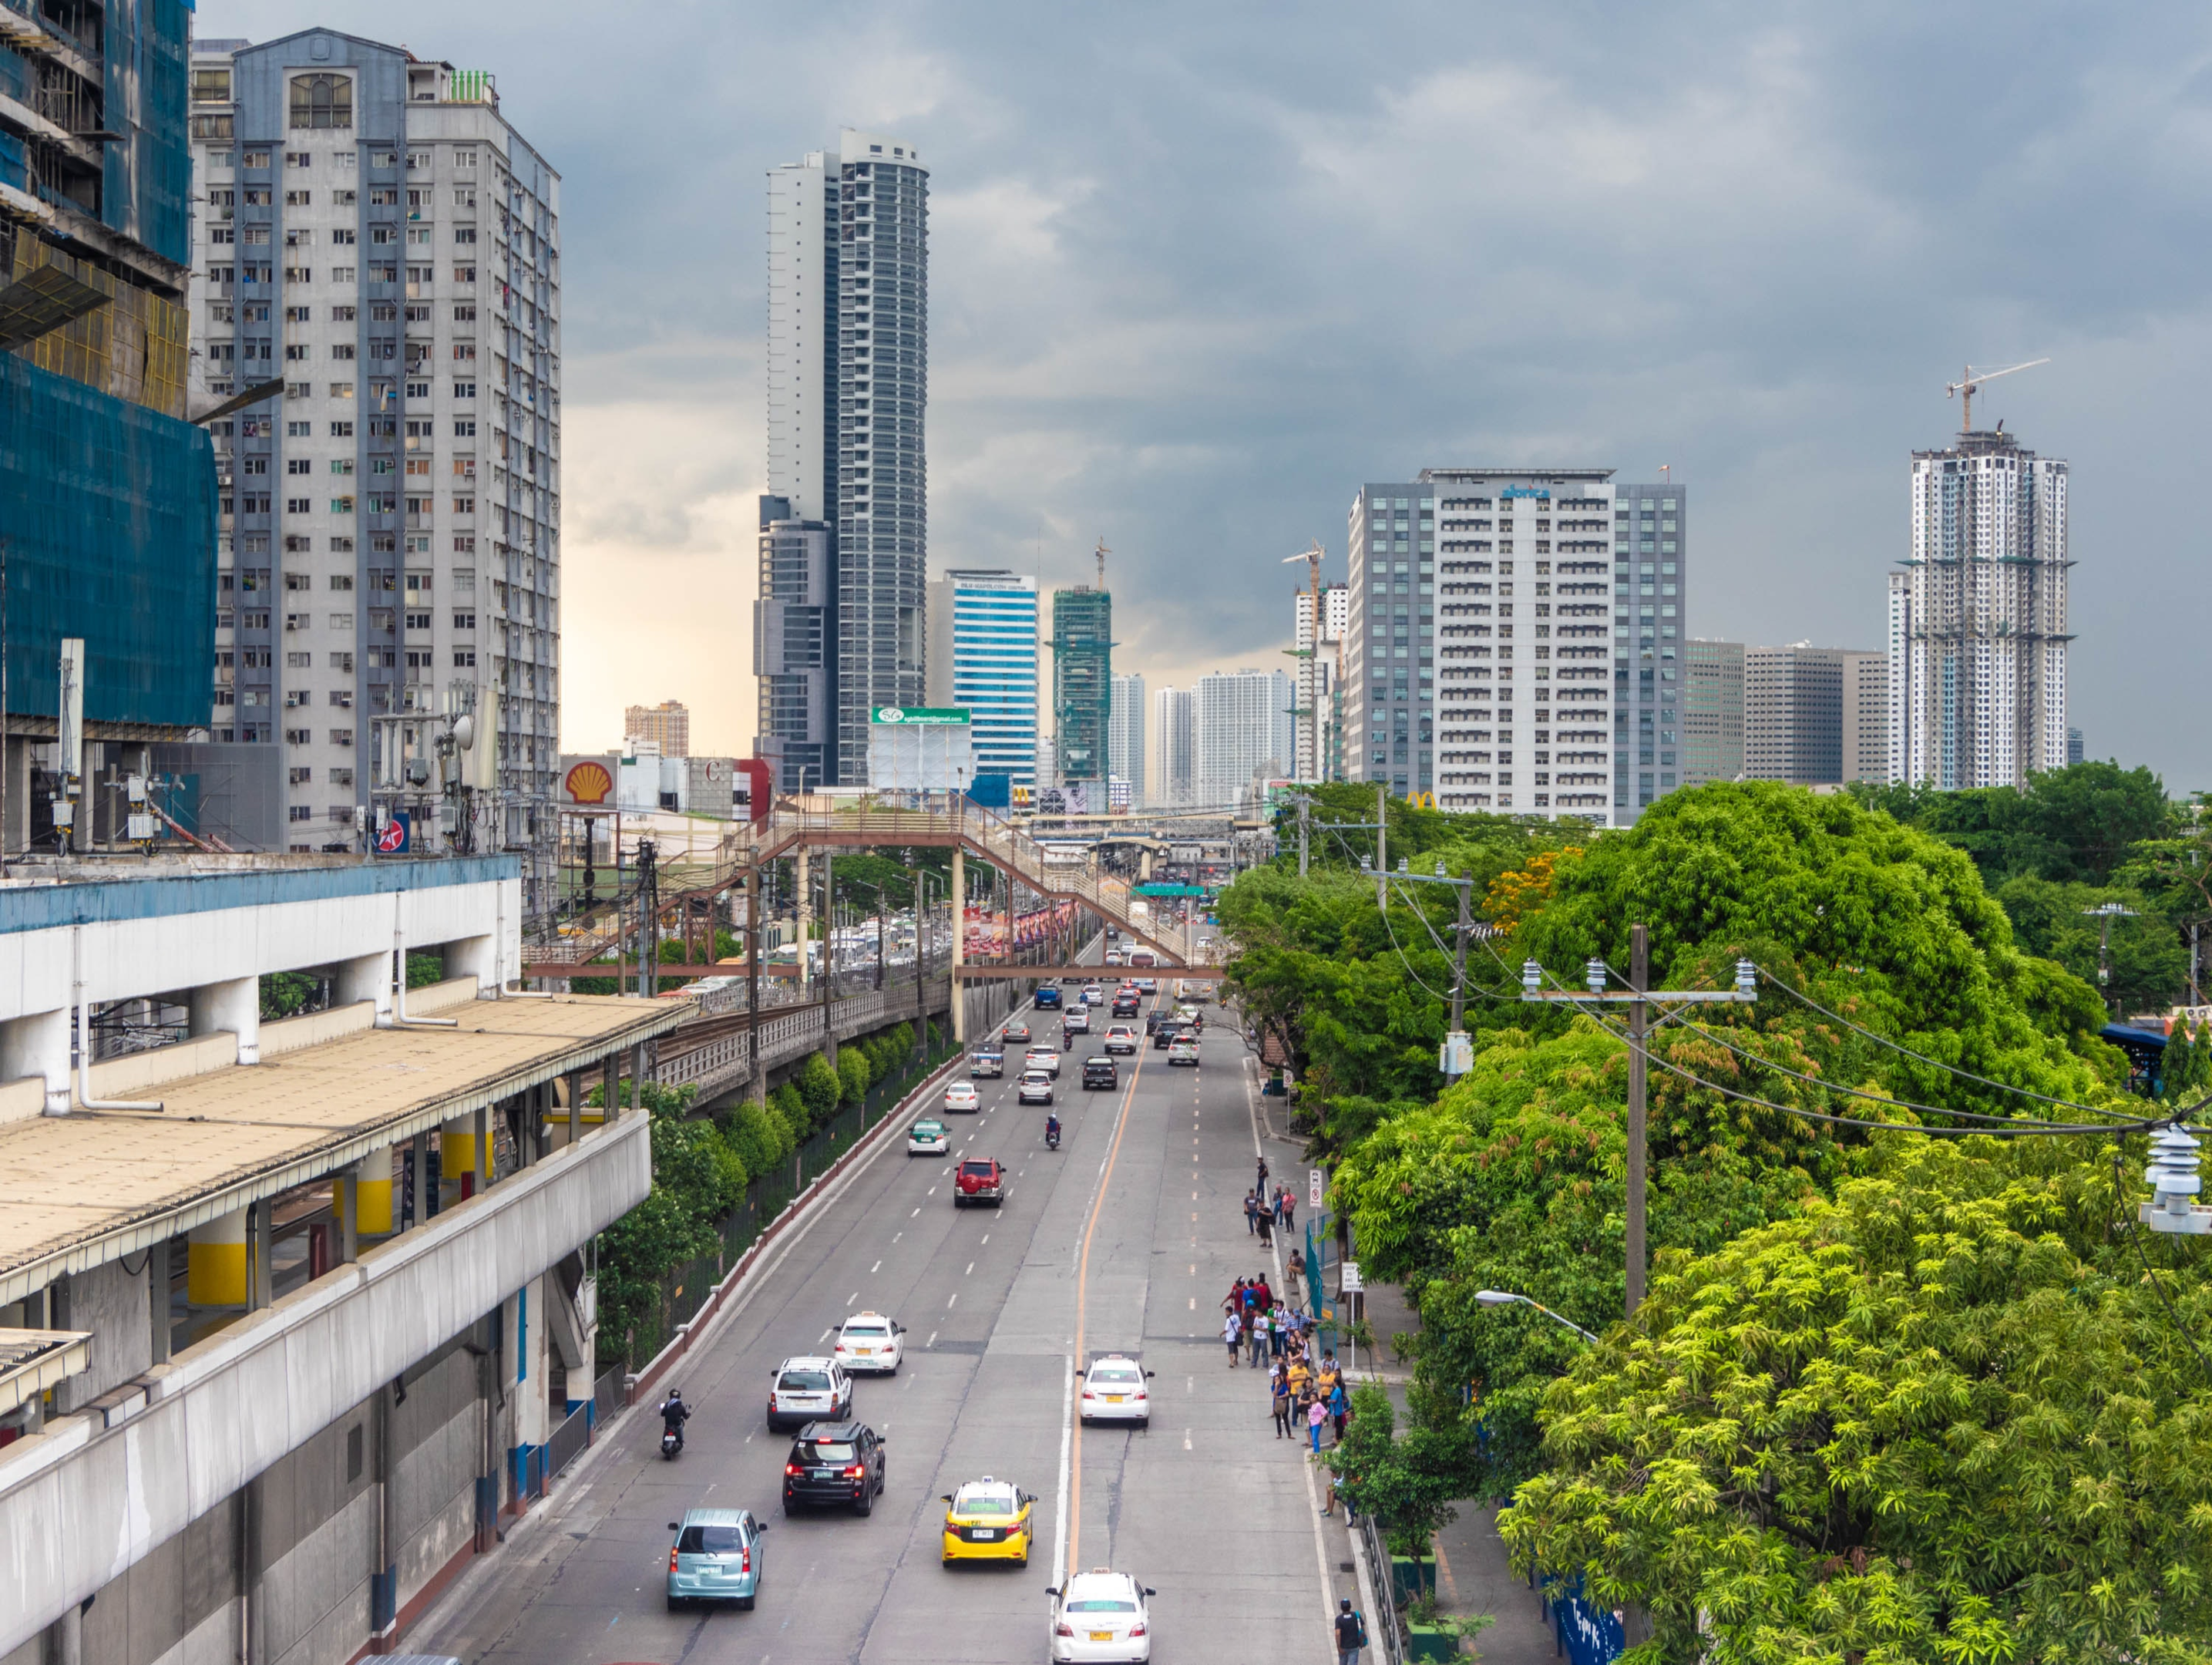 Metro Manila is the Philippines' capital region | Photo by Mel Casipit from Pexels